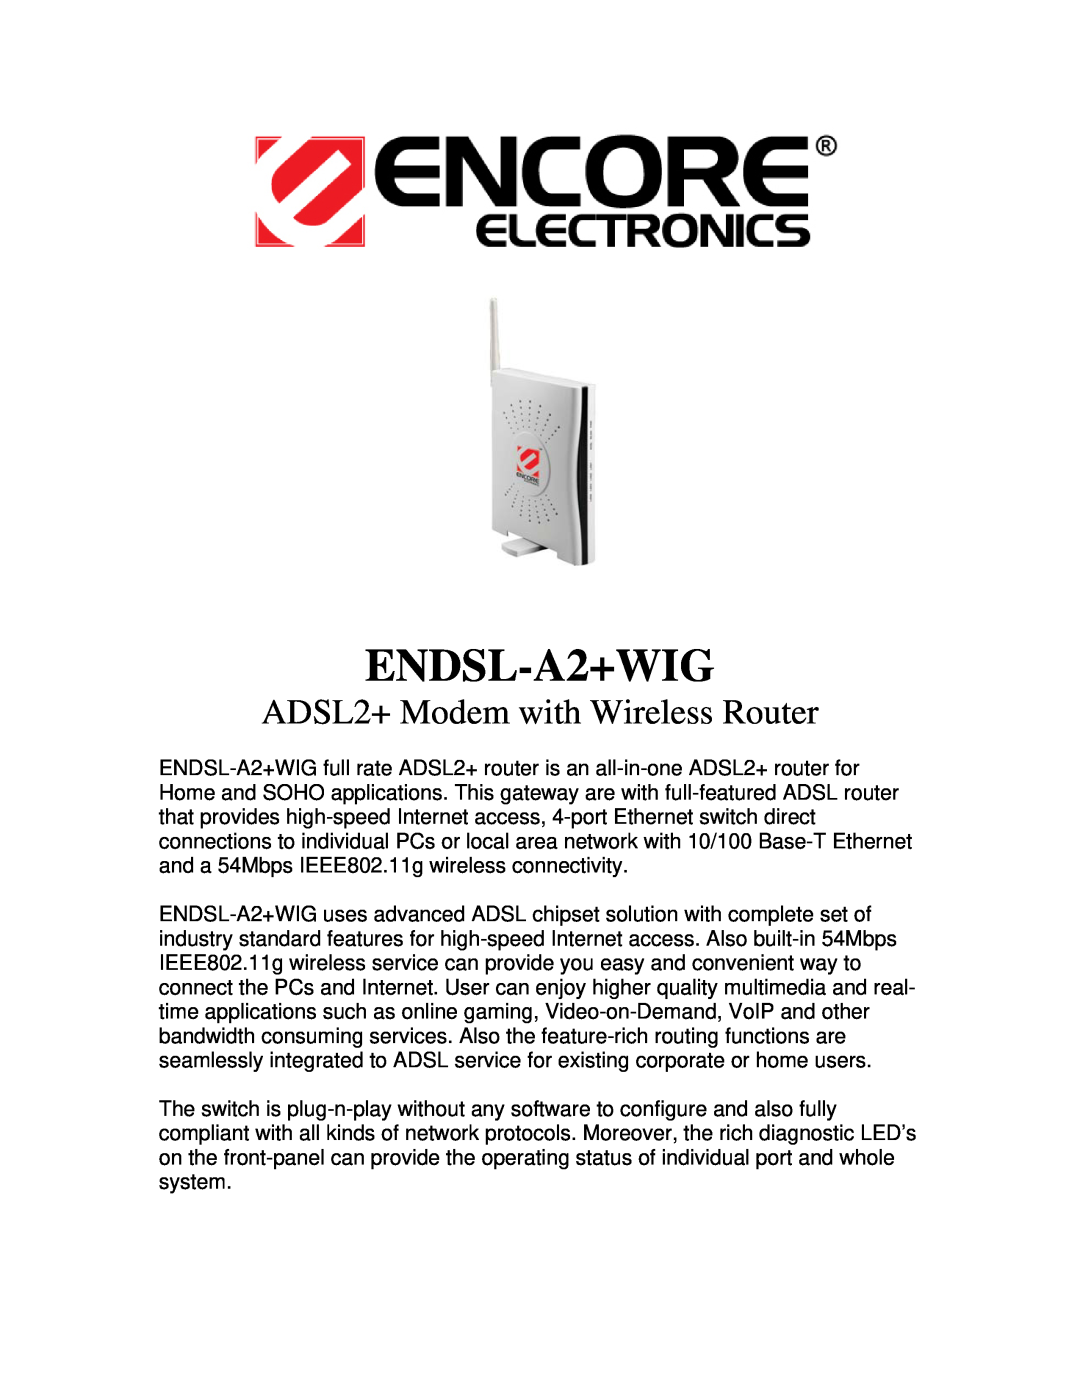 Encore electronic ENDSL-A2+WIG manual ADSL2+ Modem with Wireless Router 